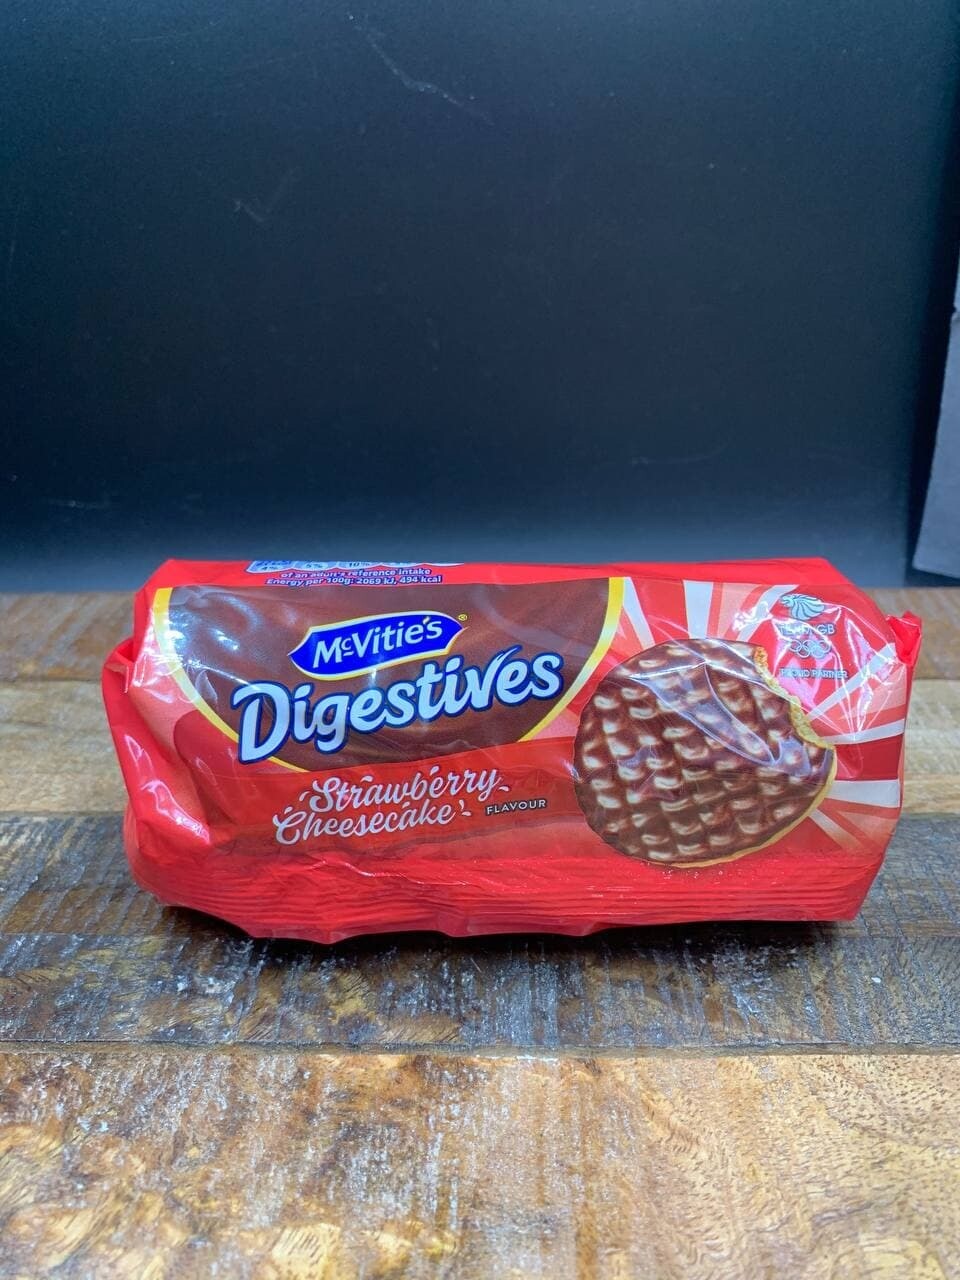 Mcvities Digestives Strawberry Cheesecake Flavour 243g